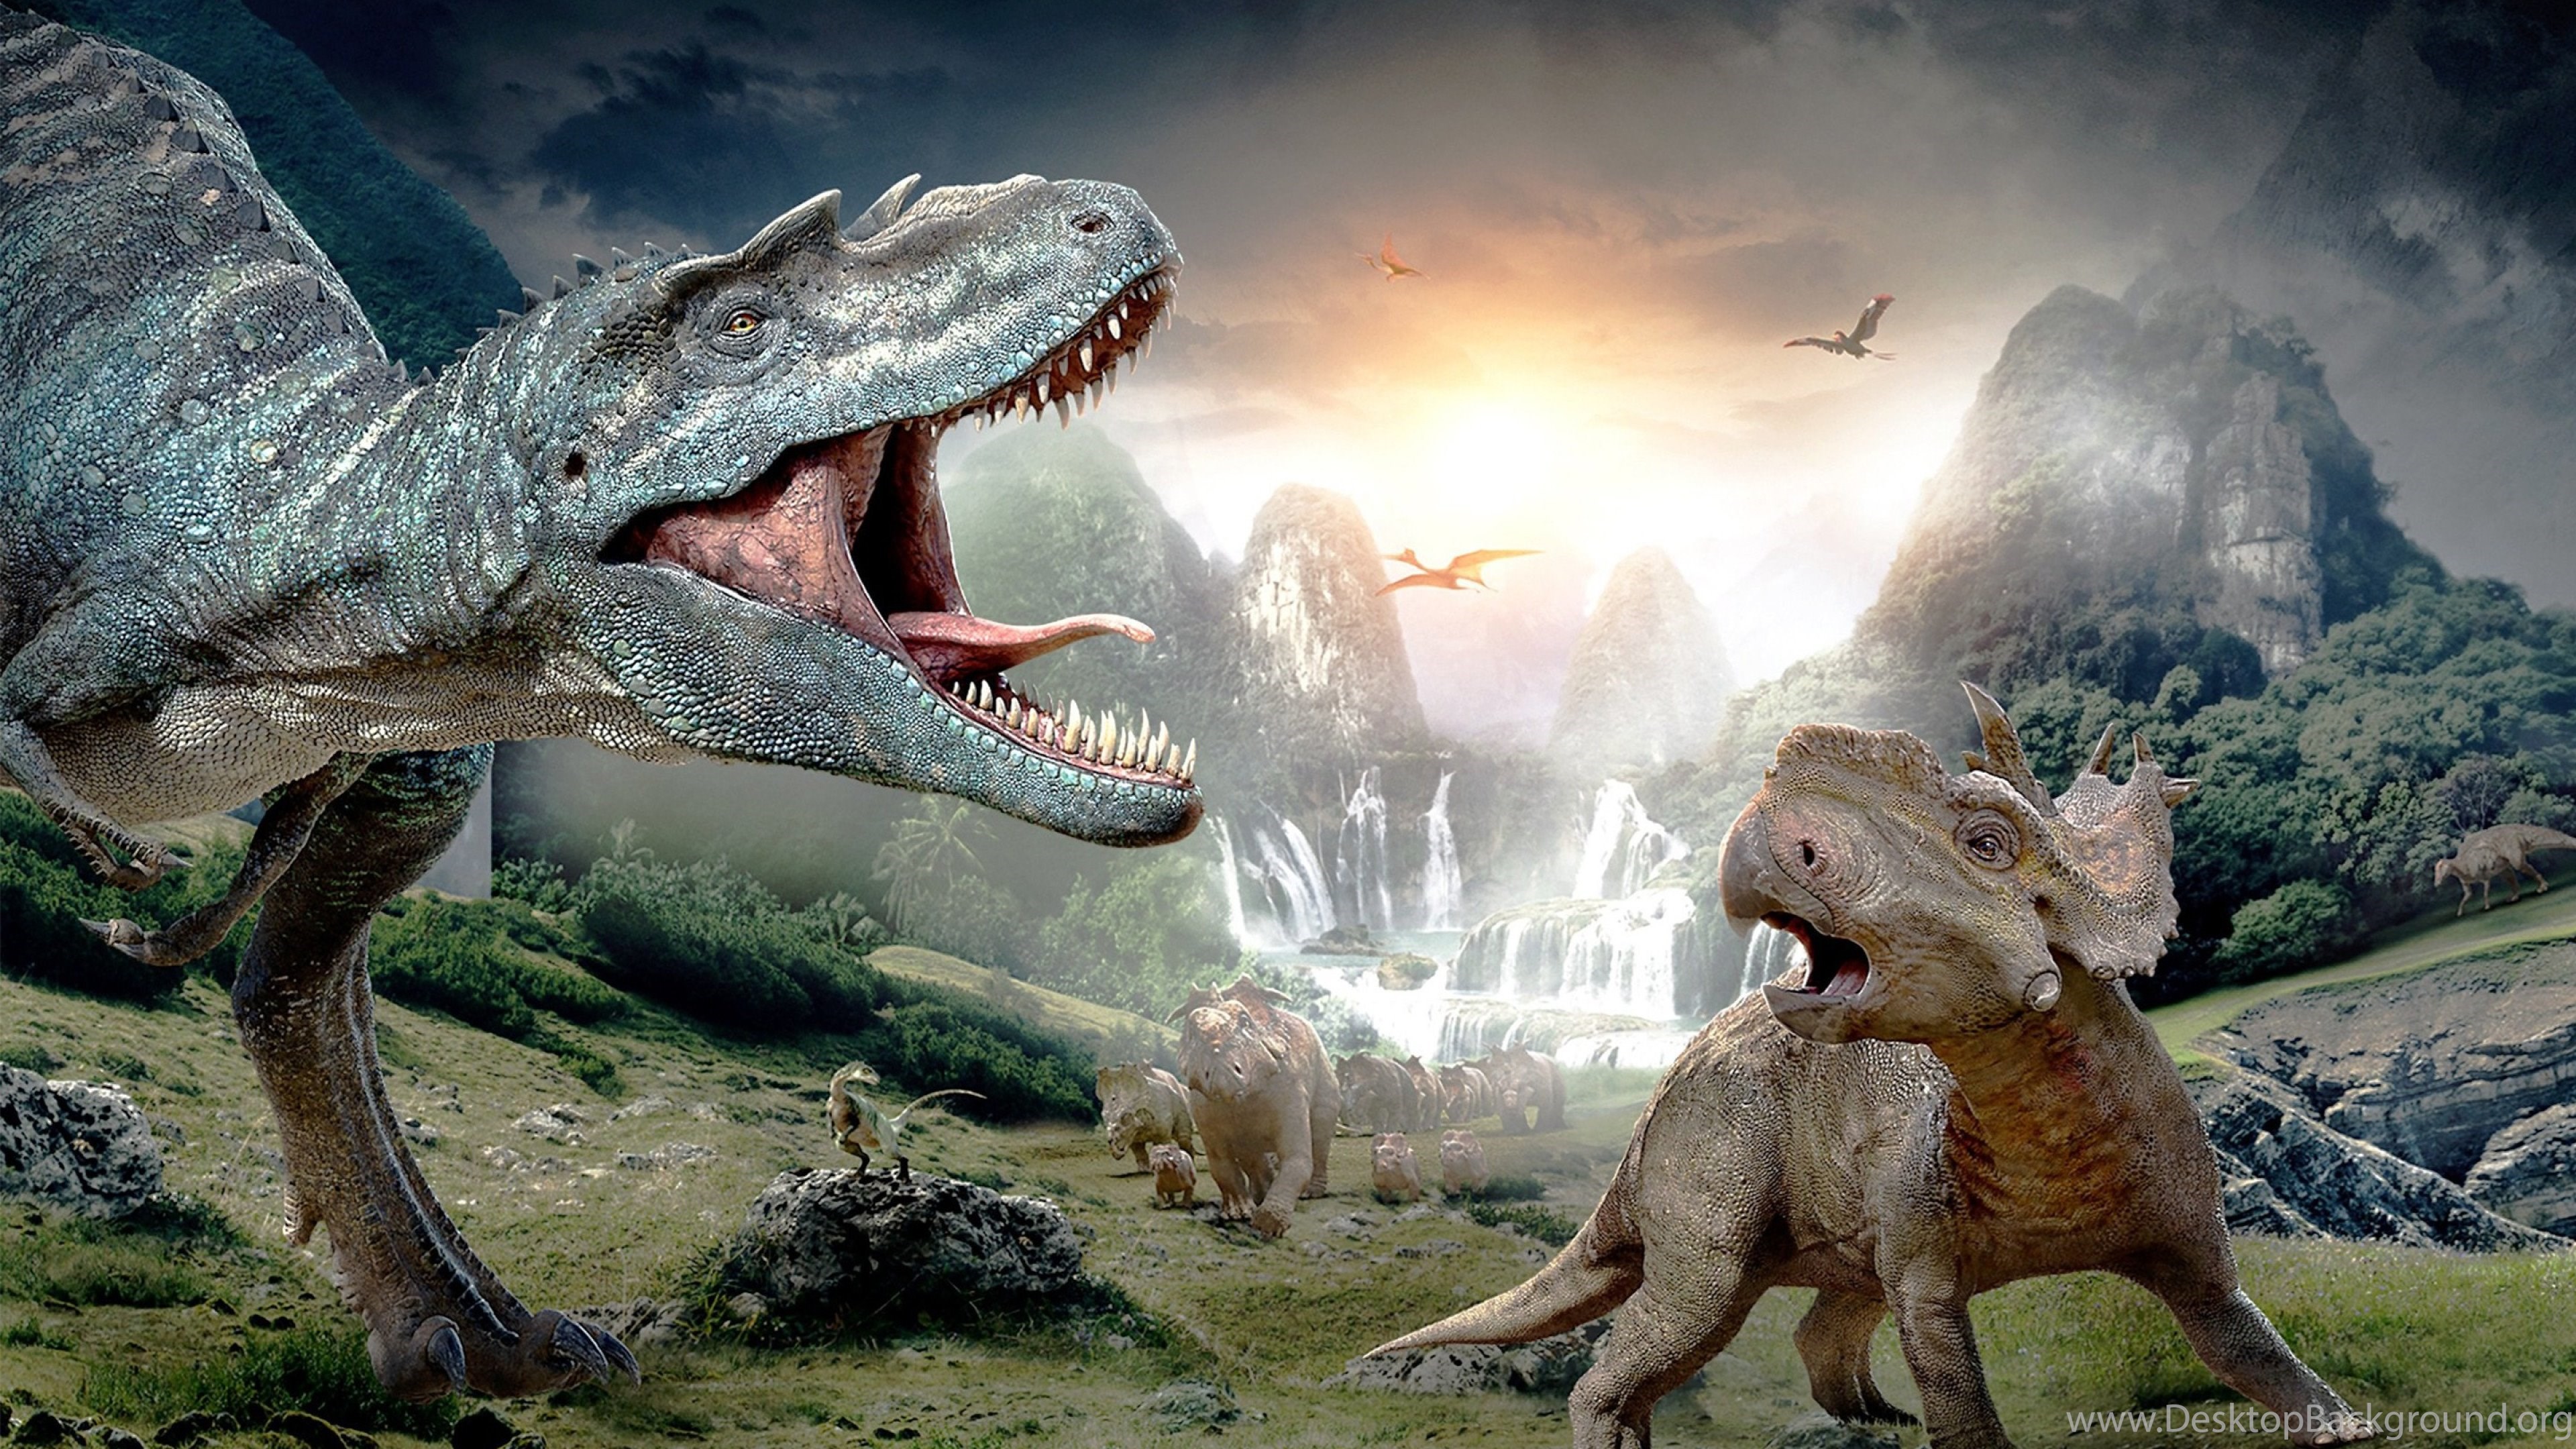 734671_walking-with-dinosaurs-t-rex-wallpapers-4k-uhdtv-resolution_3840x216...